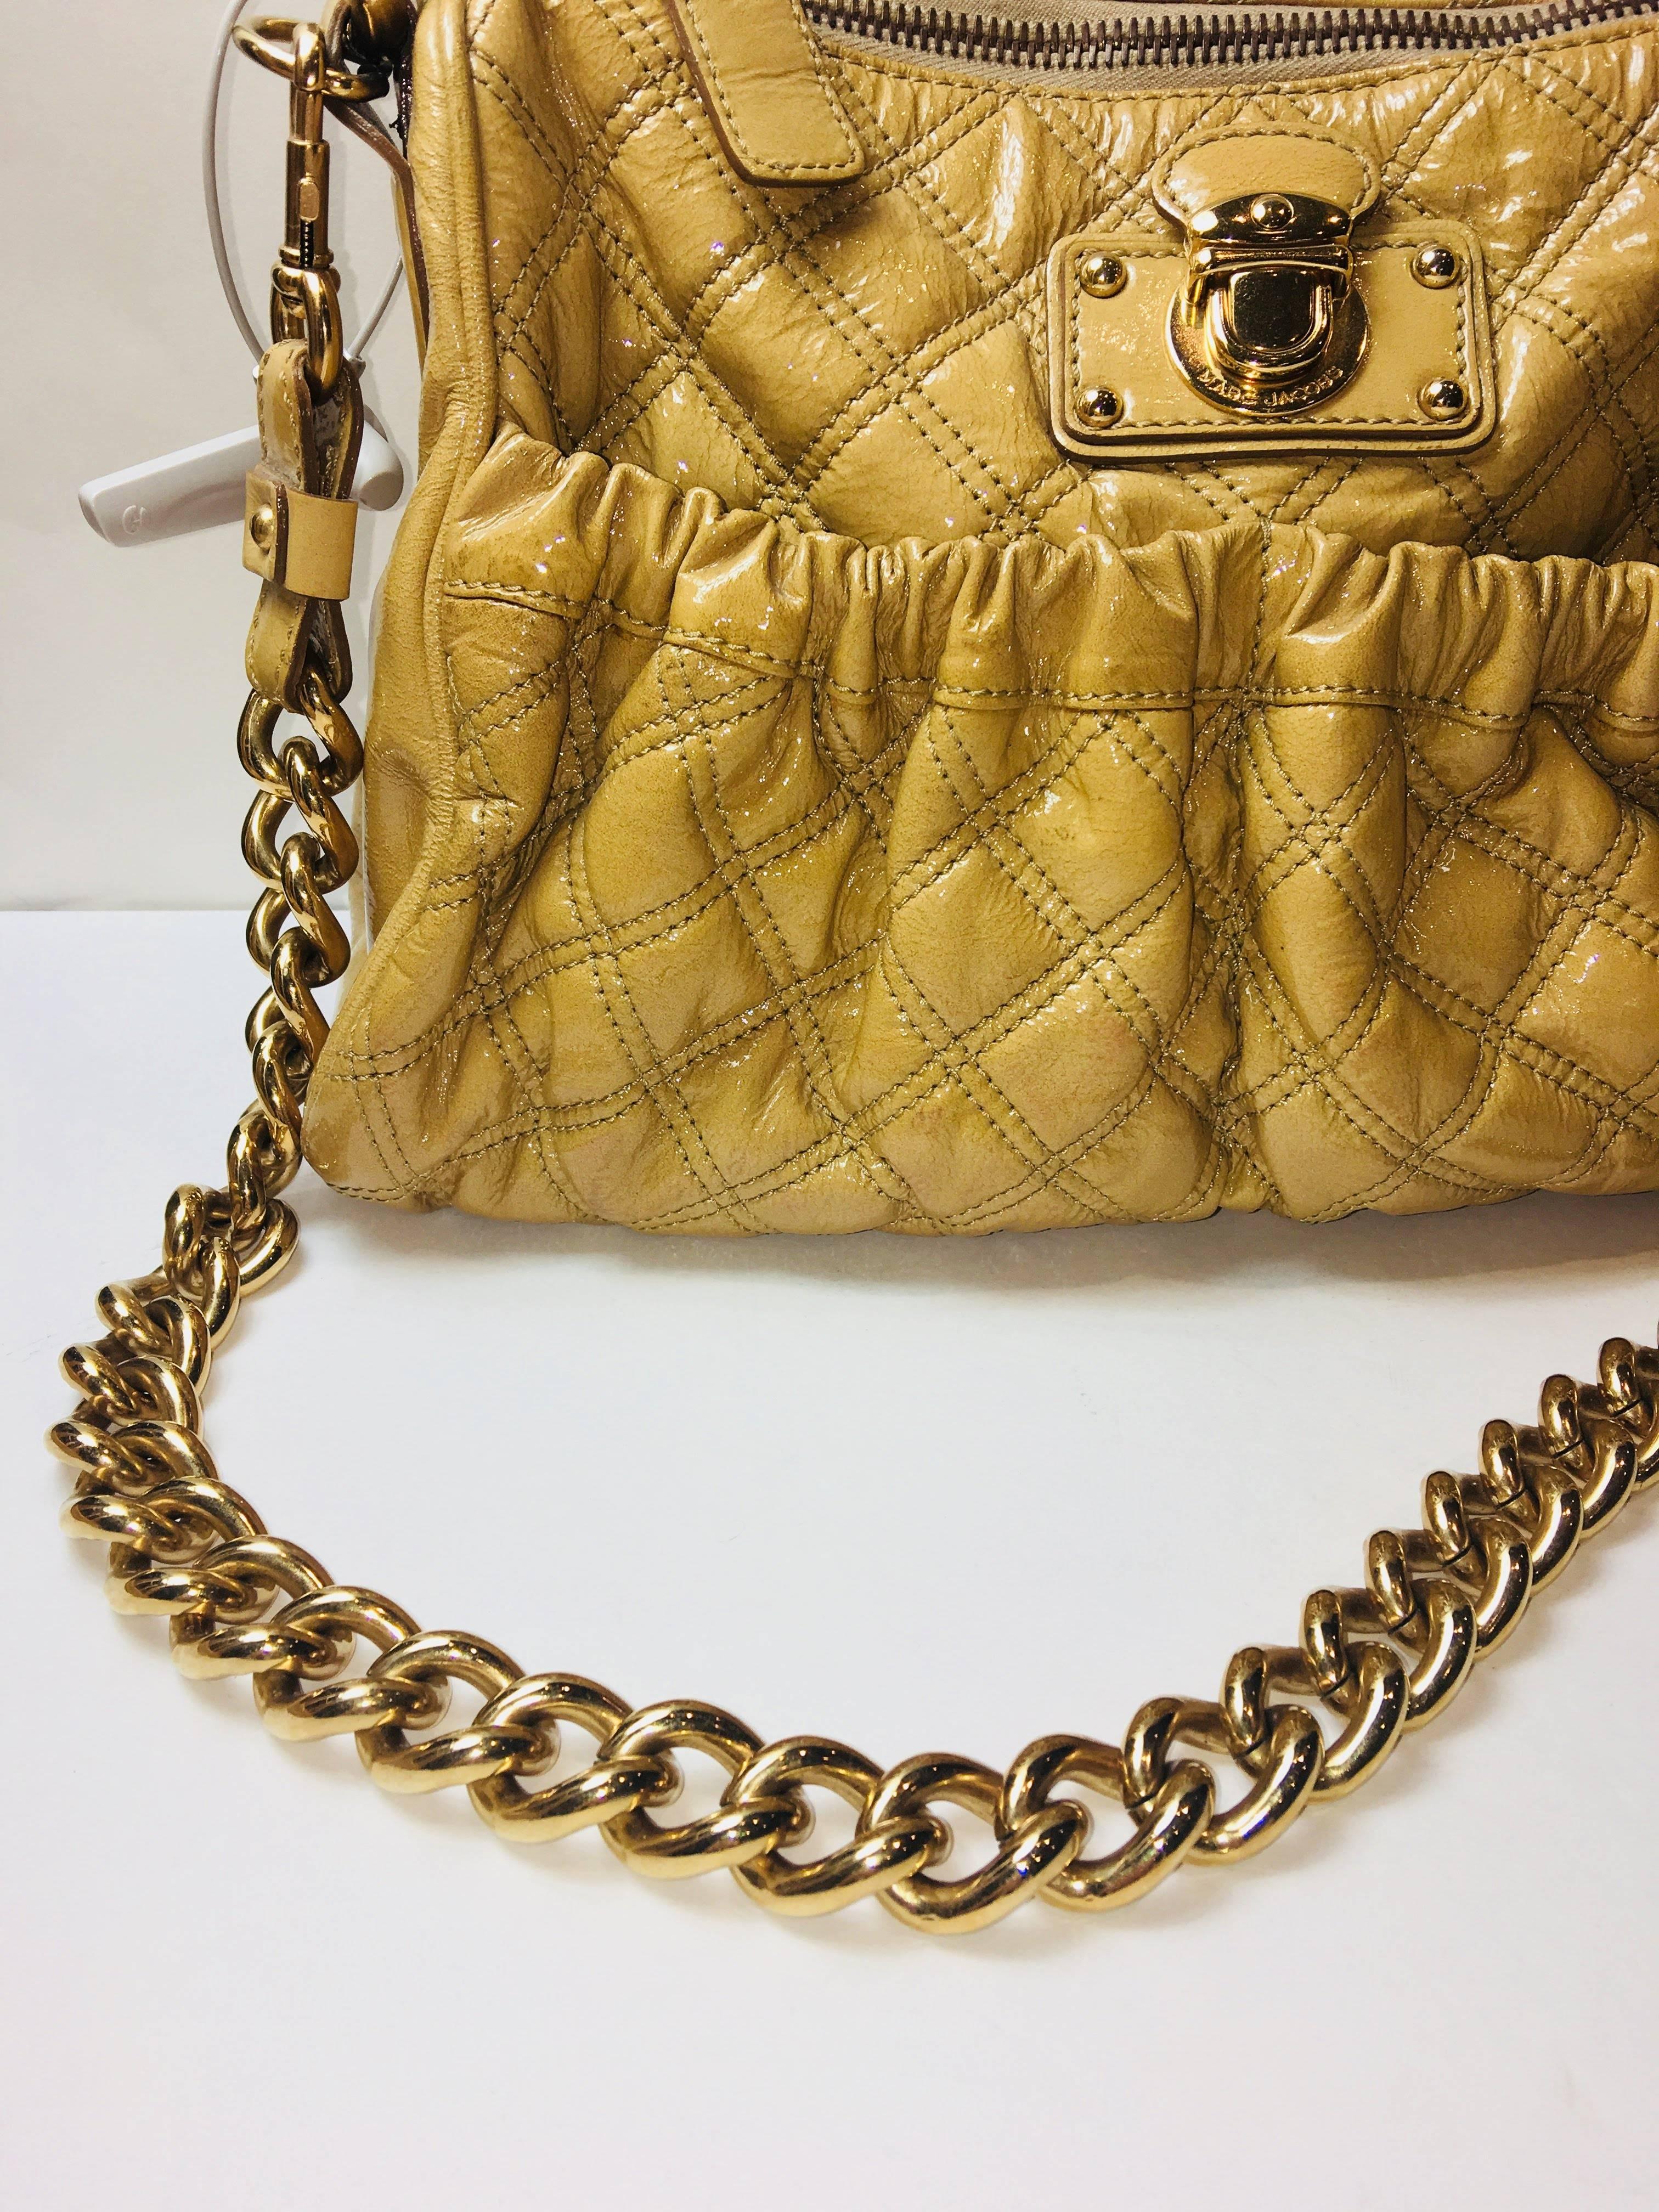 Marc Jacobs Beige Patent Leather Quilted Bag with Single Leather Strap, Wide Gold Link Strap, Zipper Top, Side Pocket.